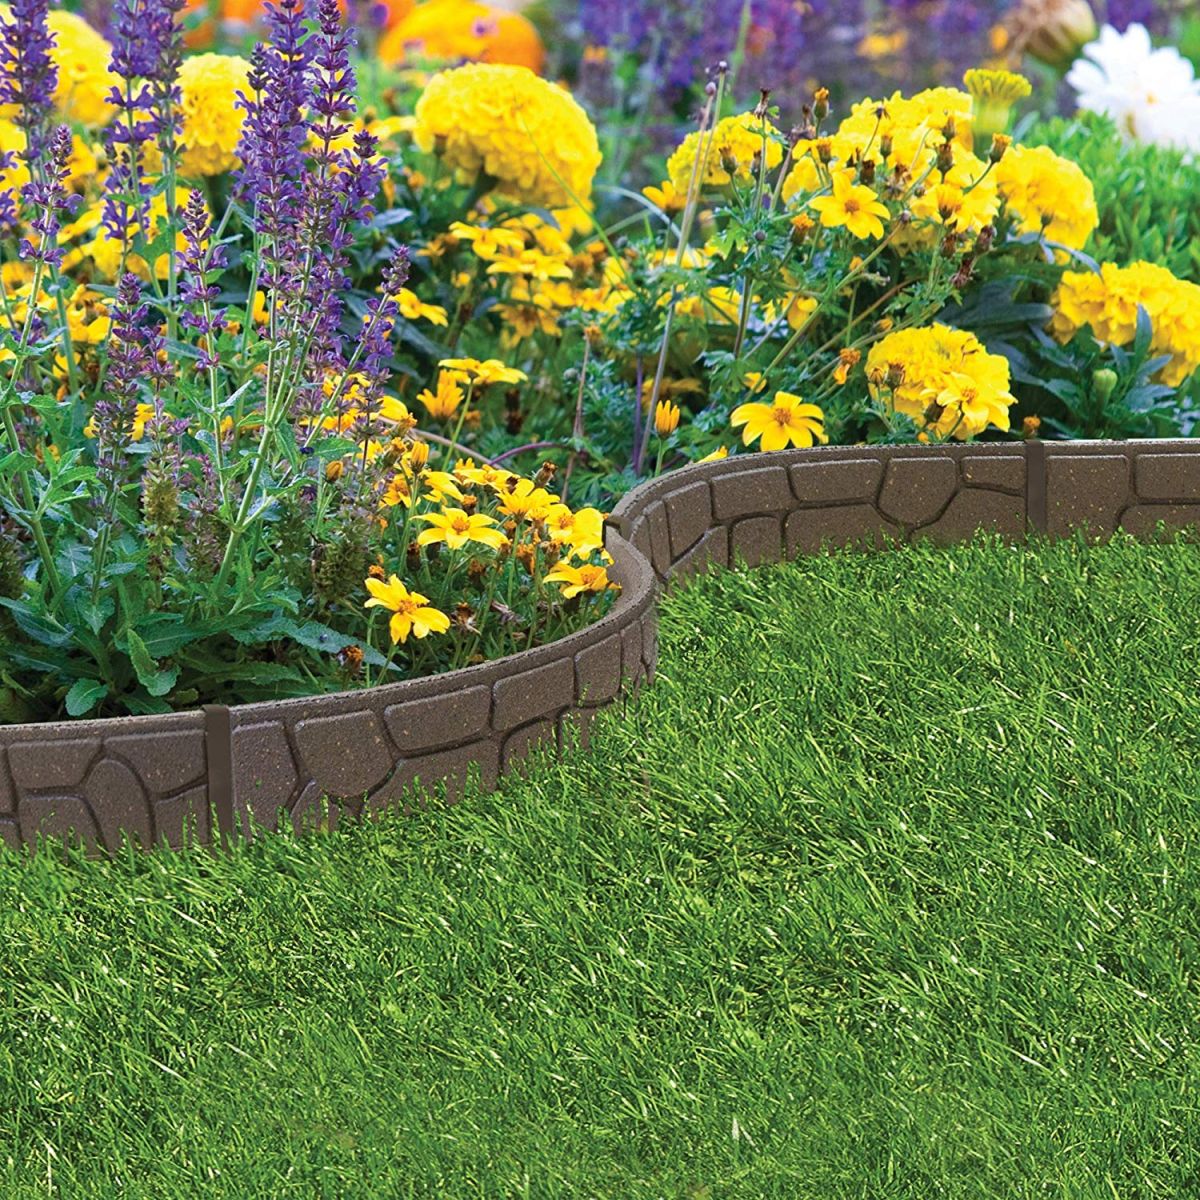 Lawn edging: 8 ideas to keep your borders neat